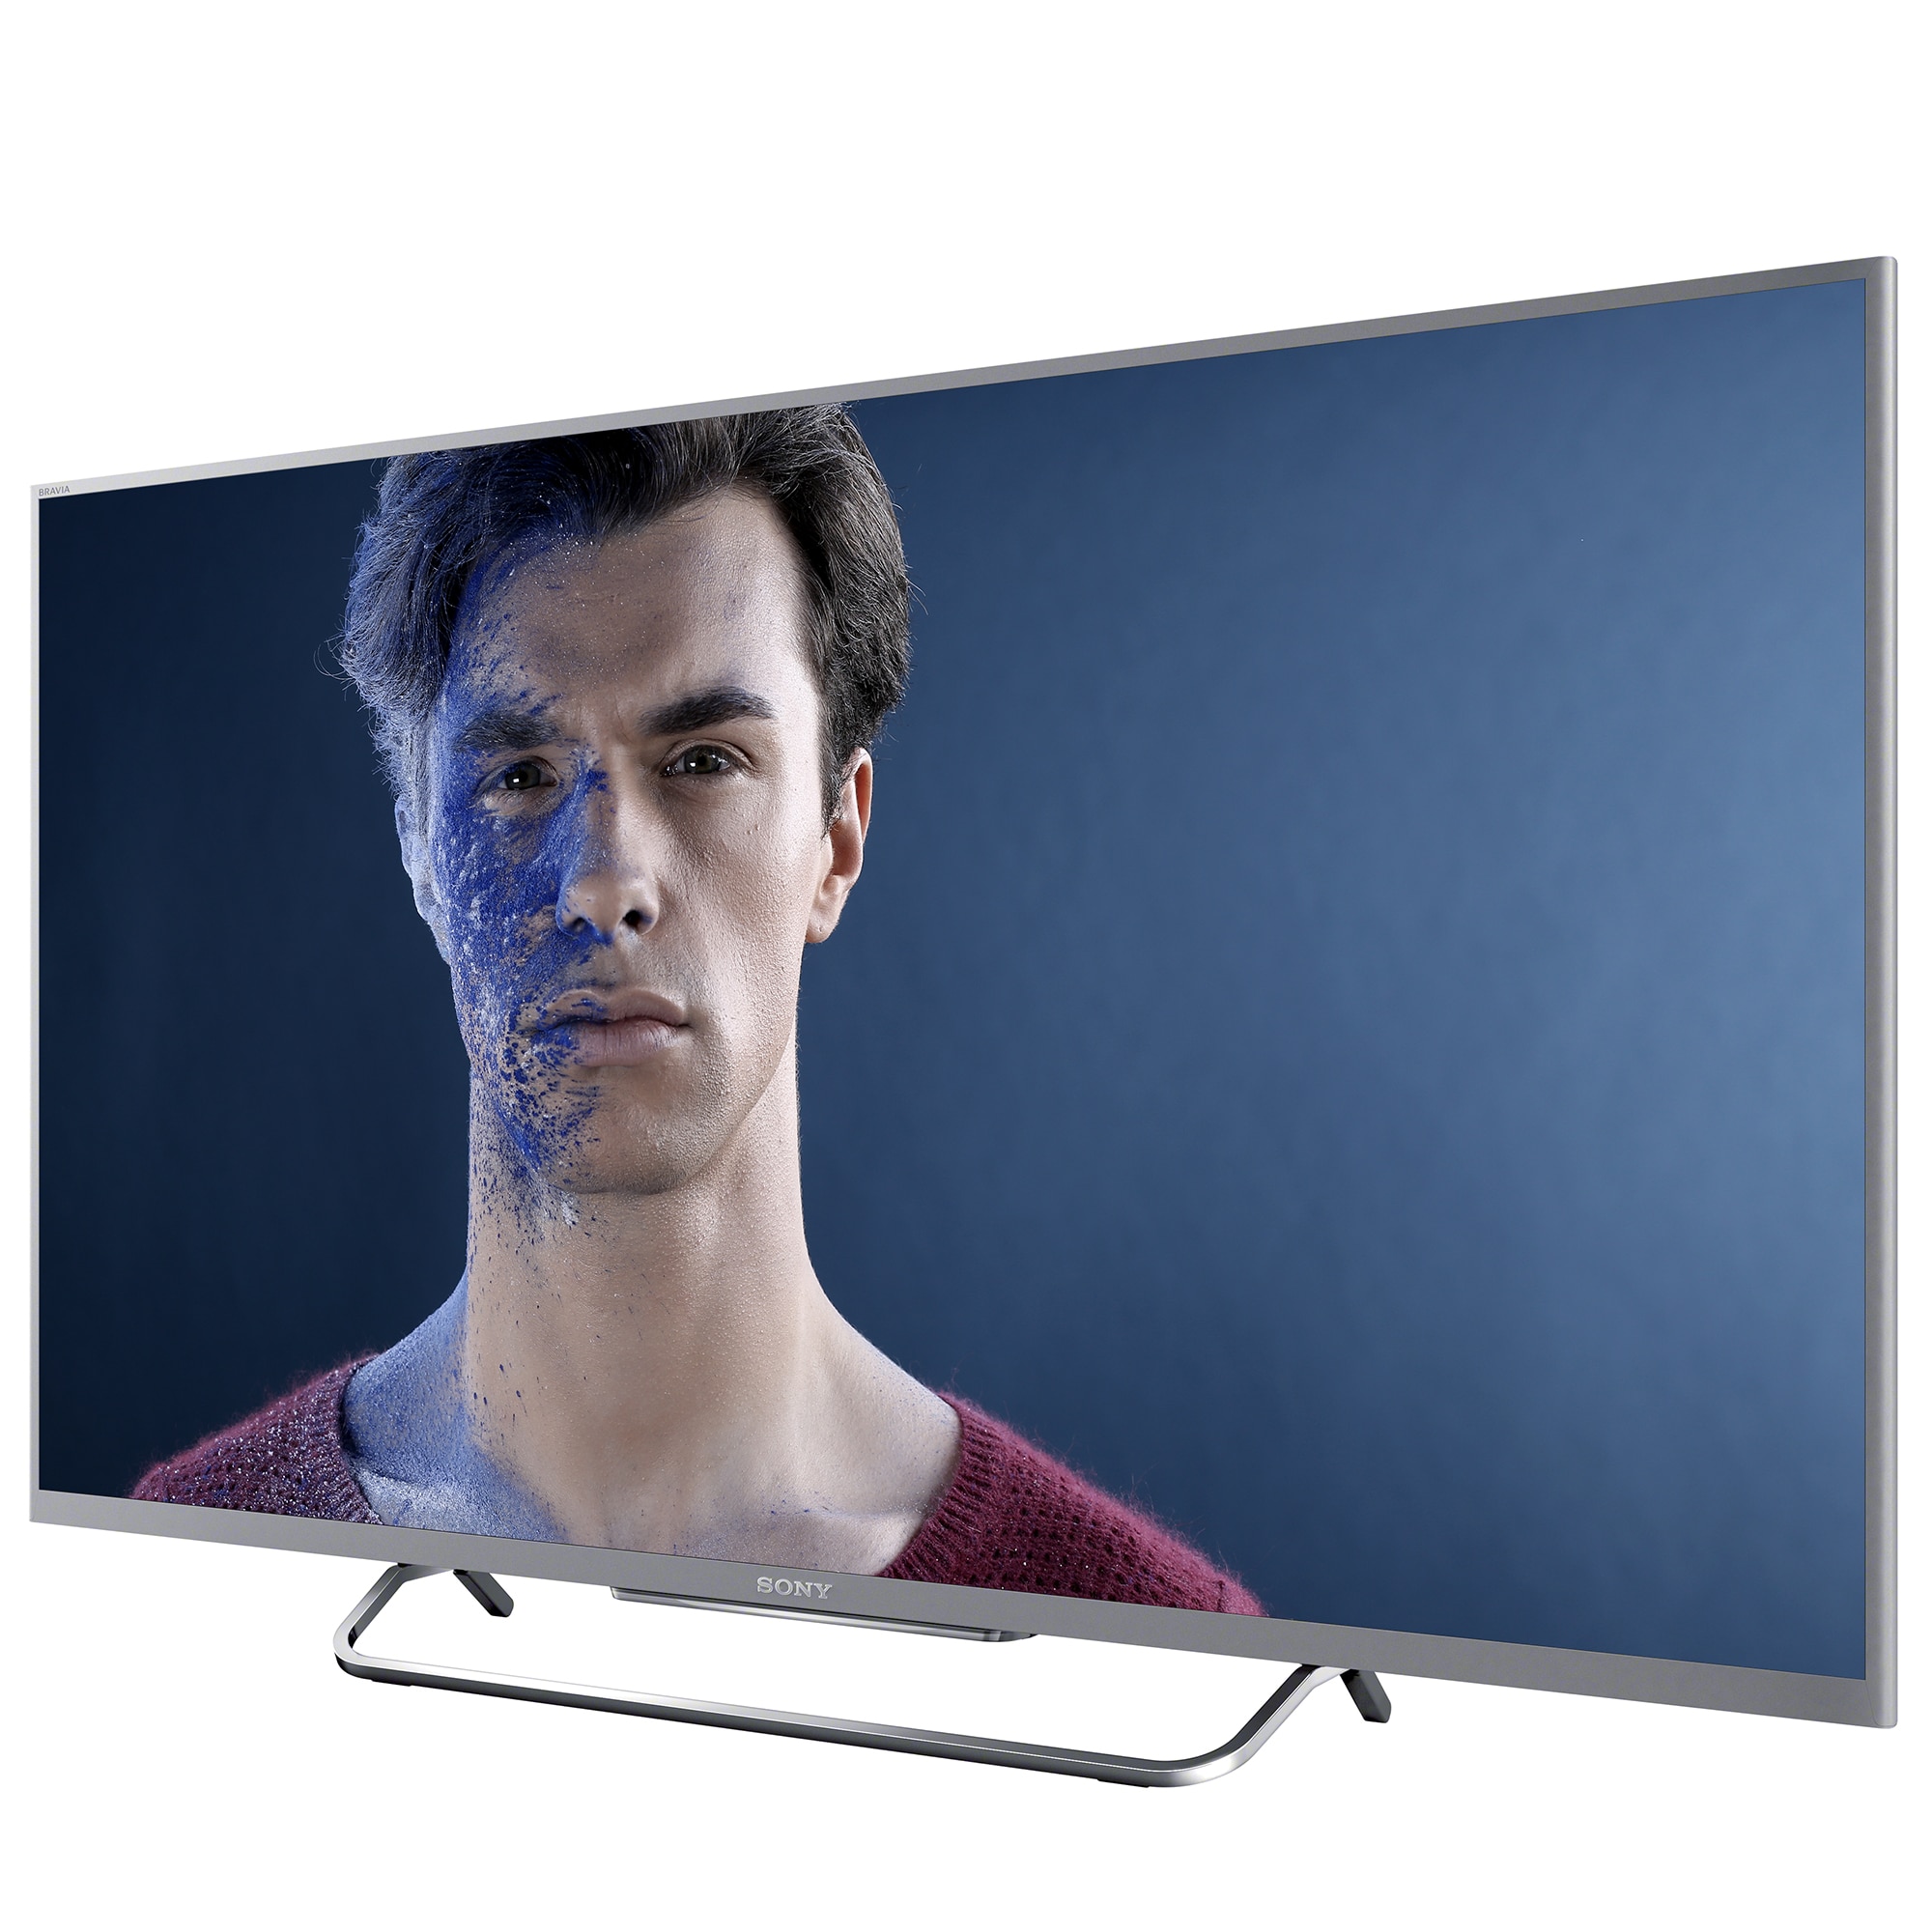 Extreme poverty Show you Bald Televizor Smart 3D LED Sony, 107cm, 42W815, Full HD, Clasa A+ - eMAG.ro